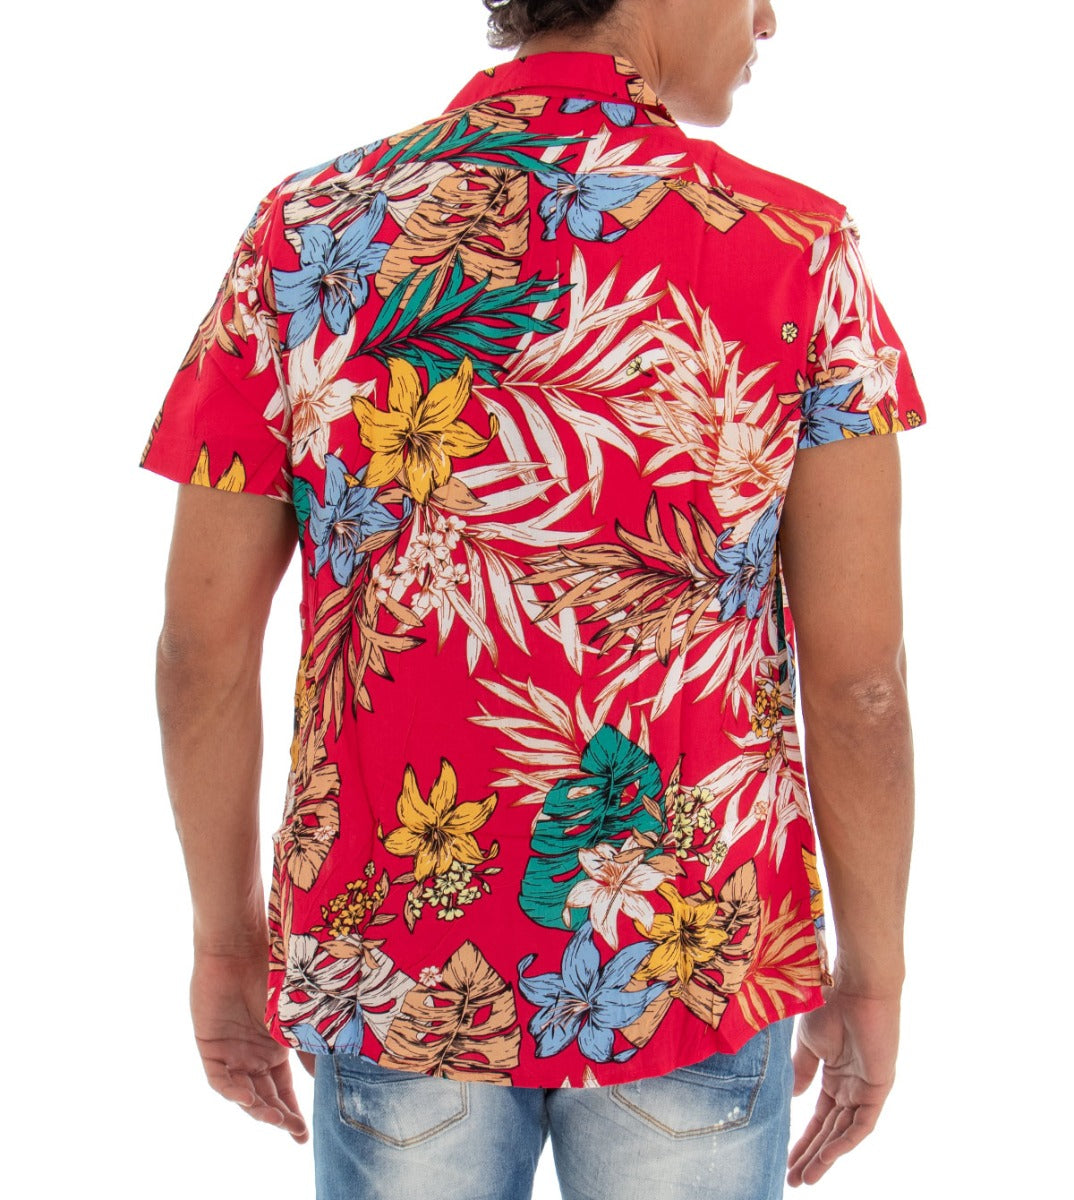 Men's Shirt Short Sleeve Collar Floral Multicolored Red GIOSAL-CC1107A